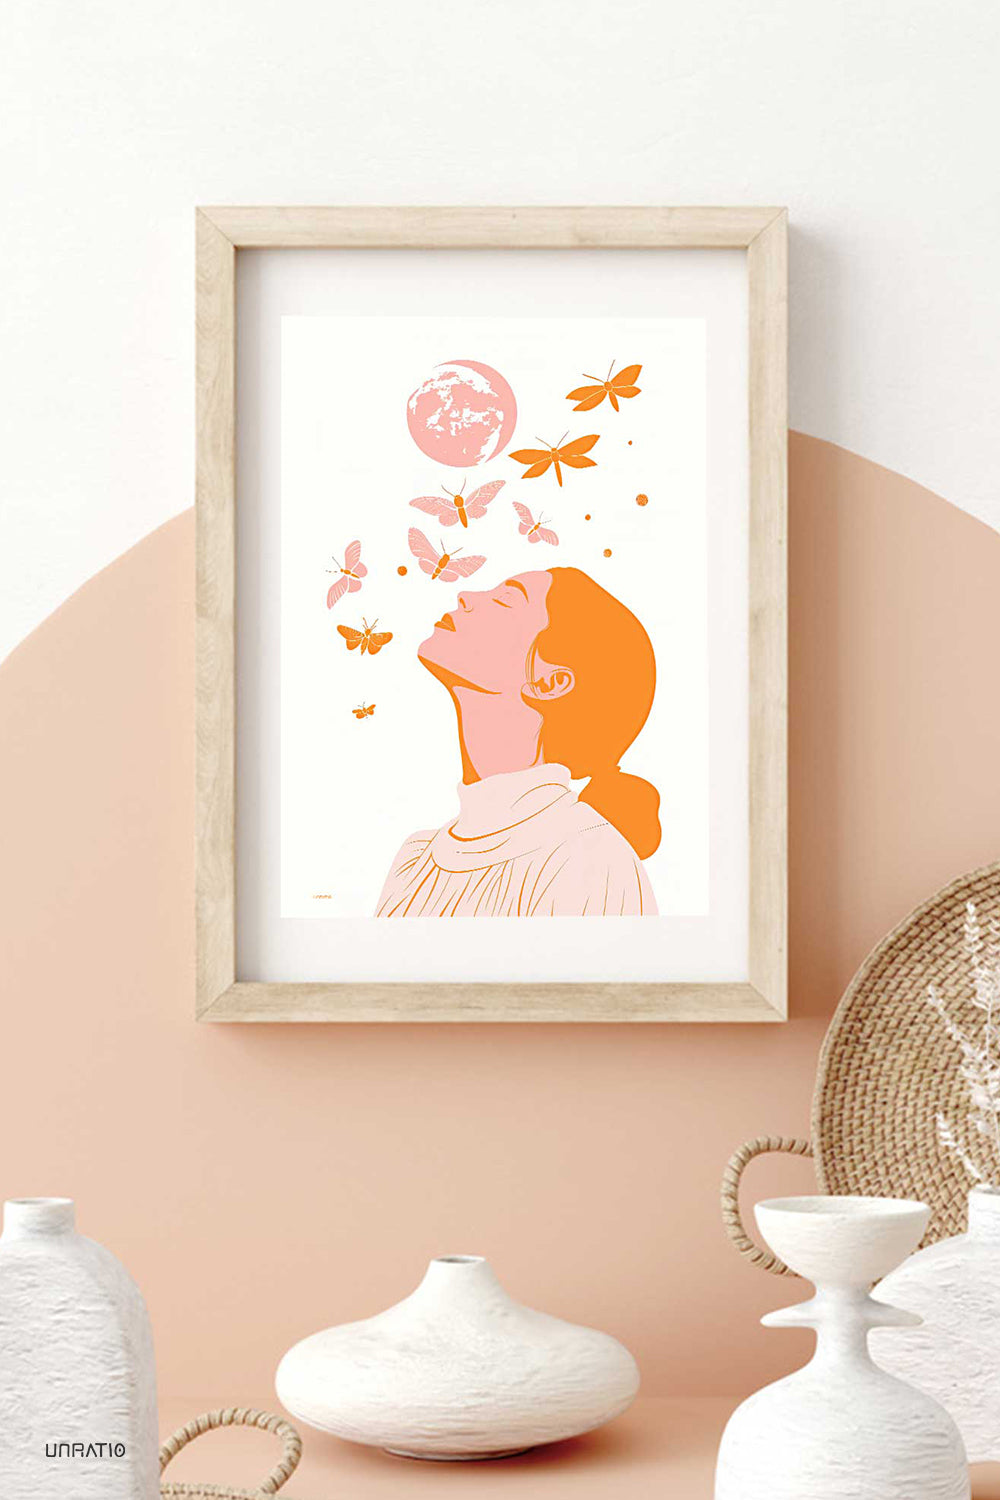 Interior decor scene with a framed print of a woman and a pink moon with moths, placed on a wall above modern white vases.